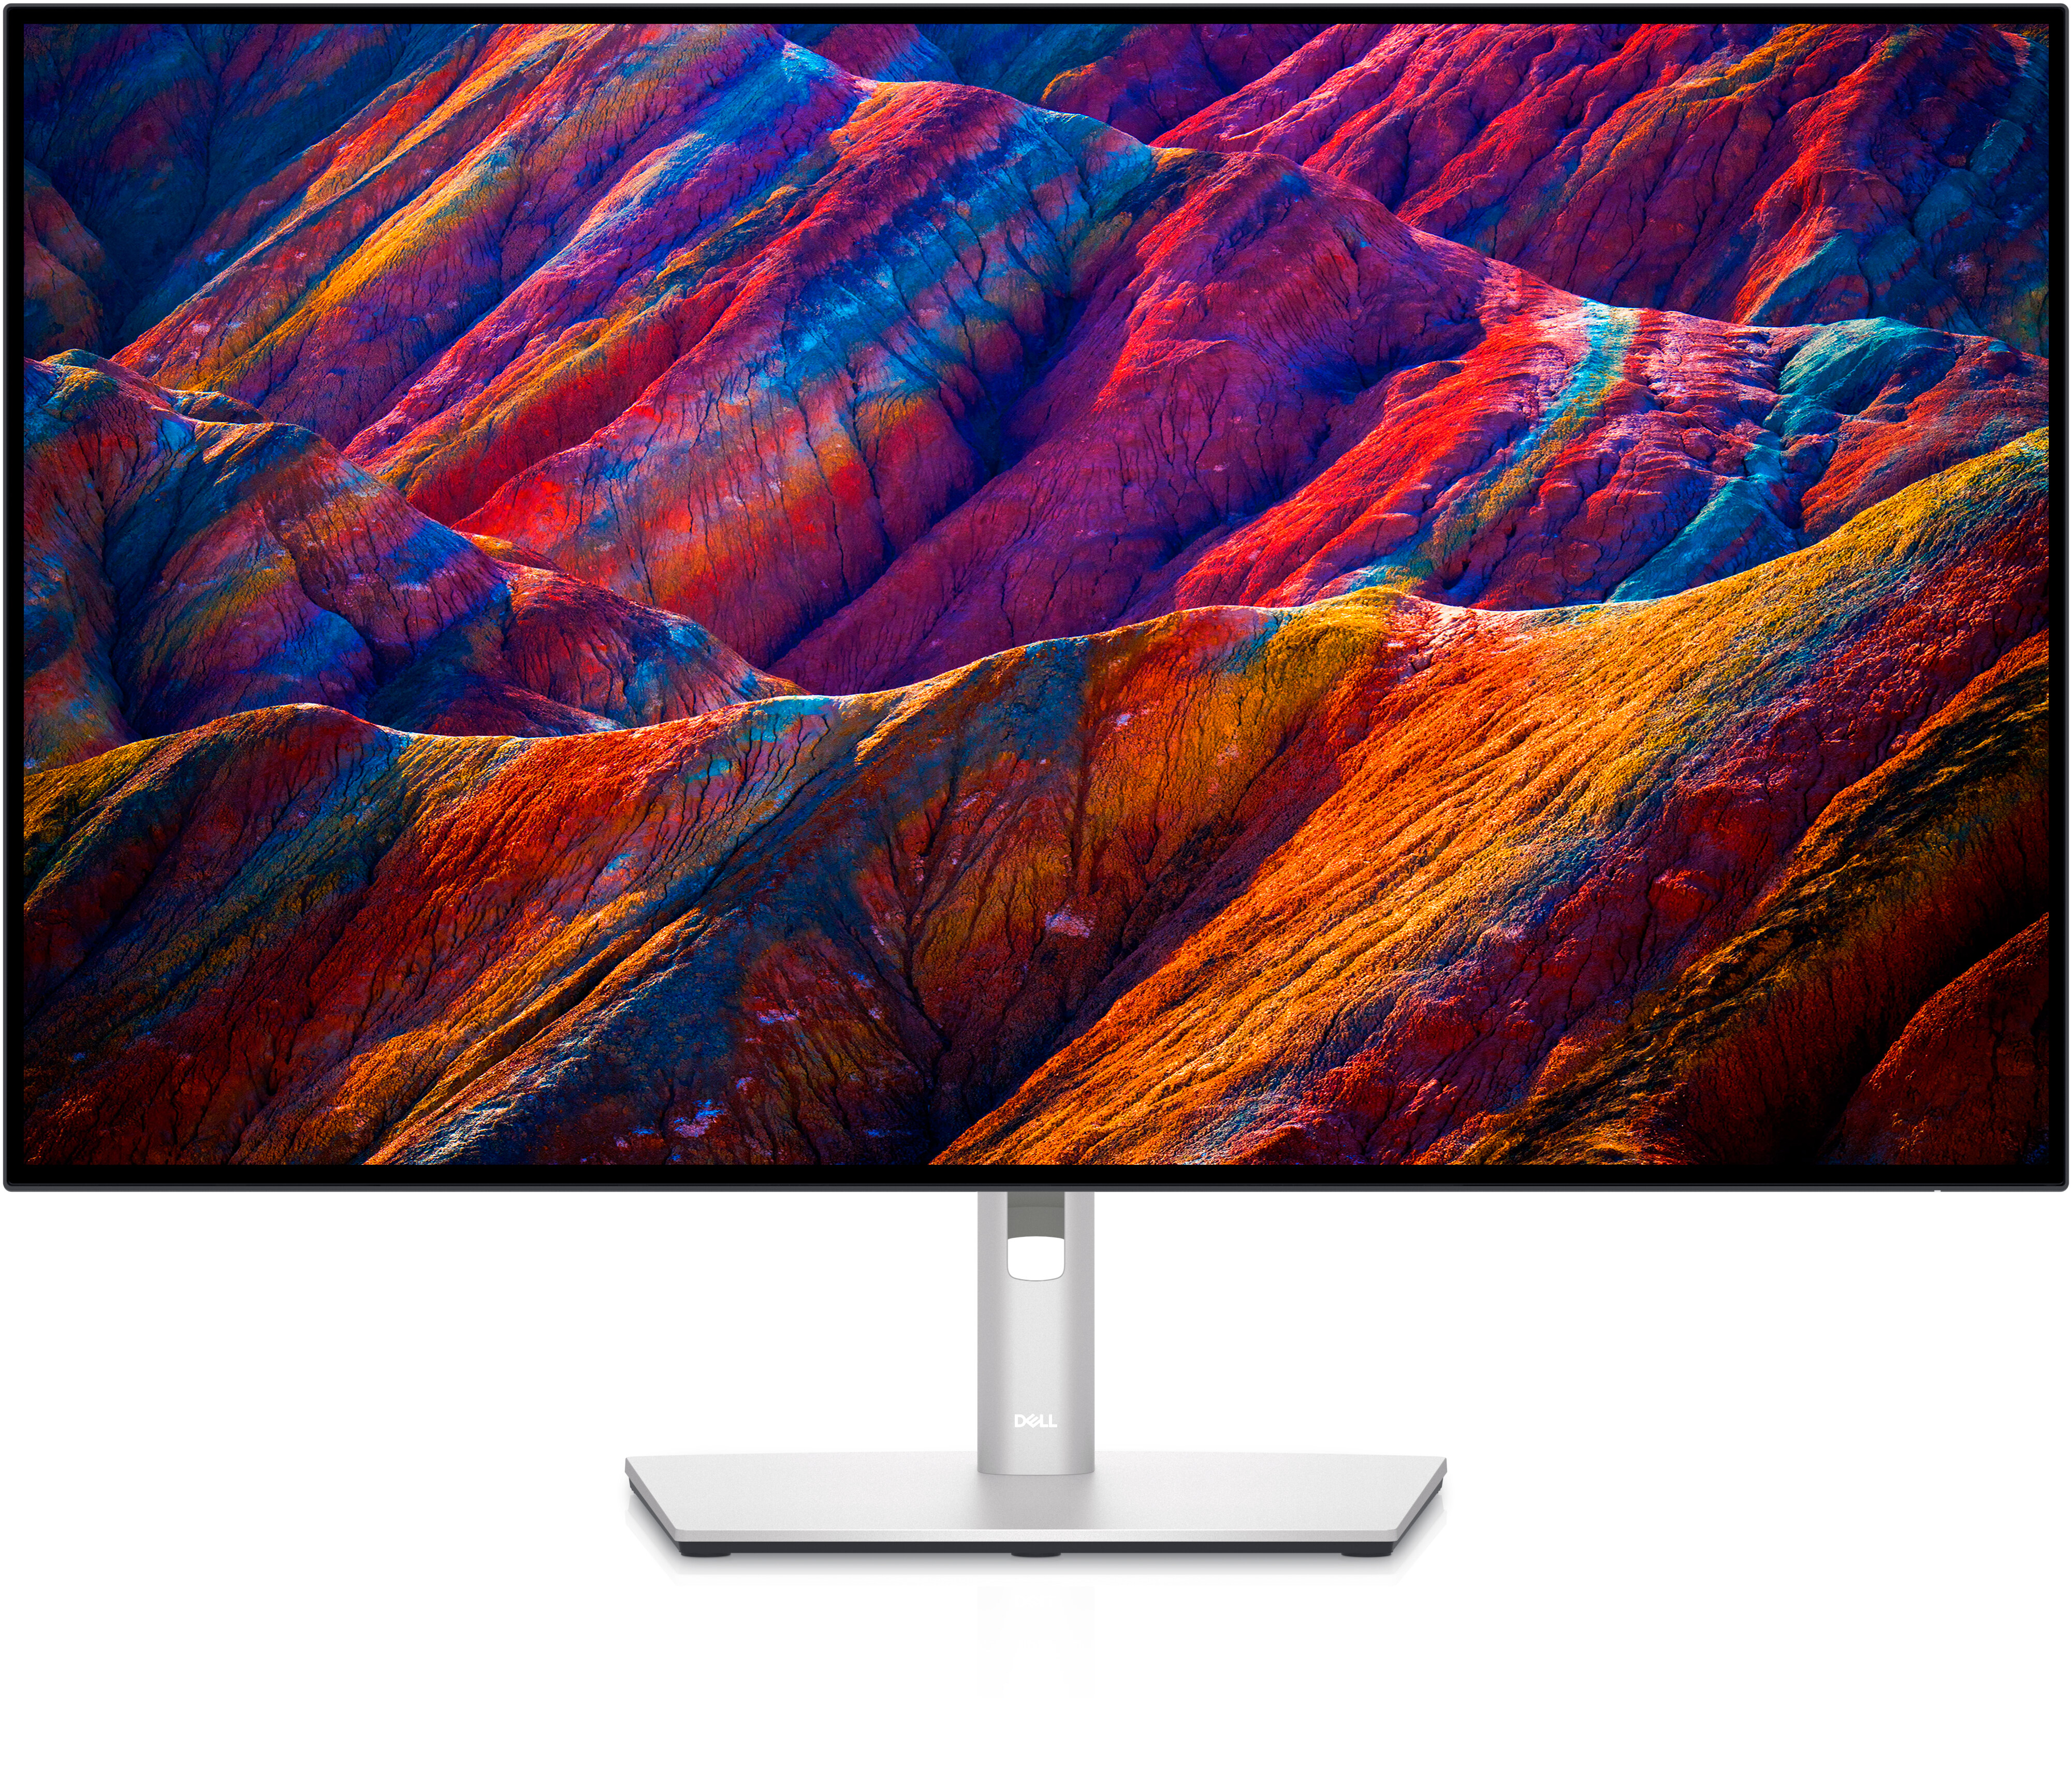 https://i.dell.com/is/image/DellContent/content/dam/ss2/product-images/dell-client-products/peripherals/monitors/u-series/u3223qe/media-gallery/monitor-u3223qe-gallery-2.psd?fmt=pjpg&pscan=auto&scl=1&wid=4002&hei=3413&qlt=100,1&resMode=sharp2&size=4002,3413&chrss=full&imwidth=5000